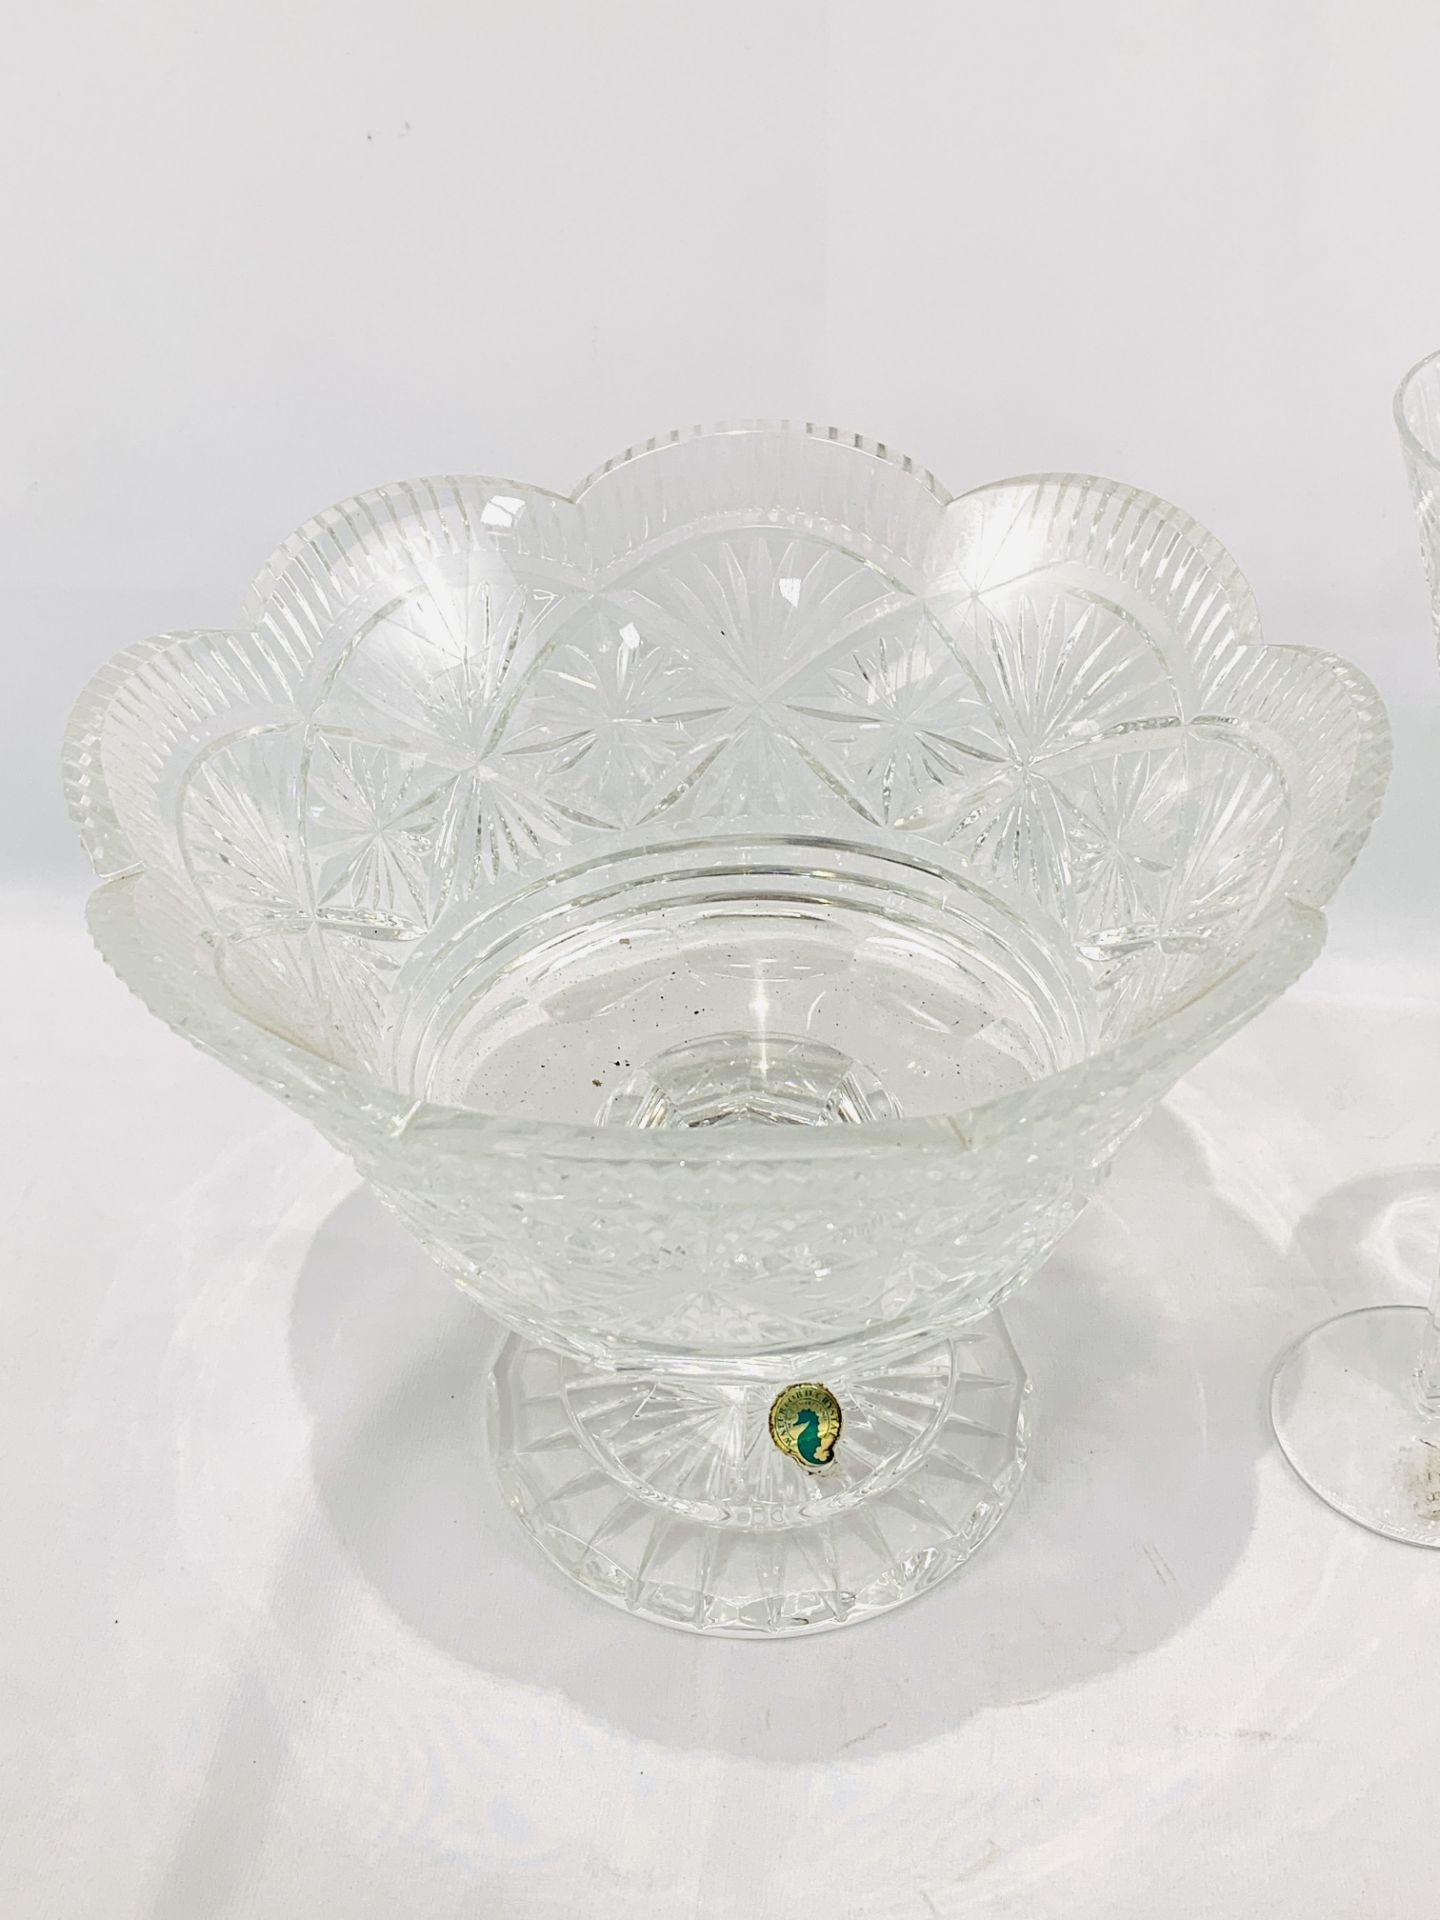 Waterford crystal cut glass fruit bowl and 2 Waterford crystal flutes - Image 5 of 5